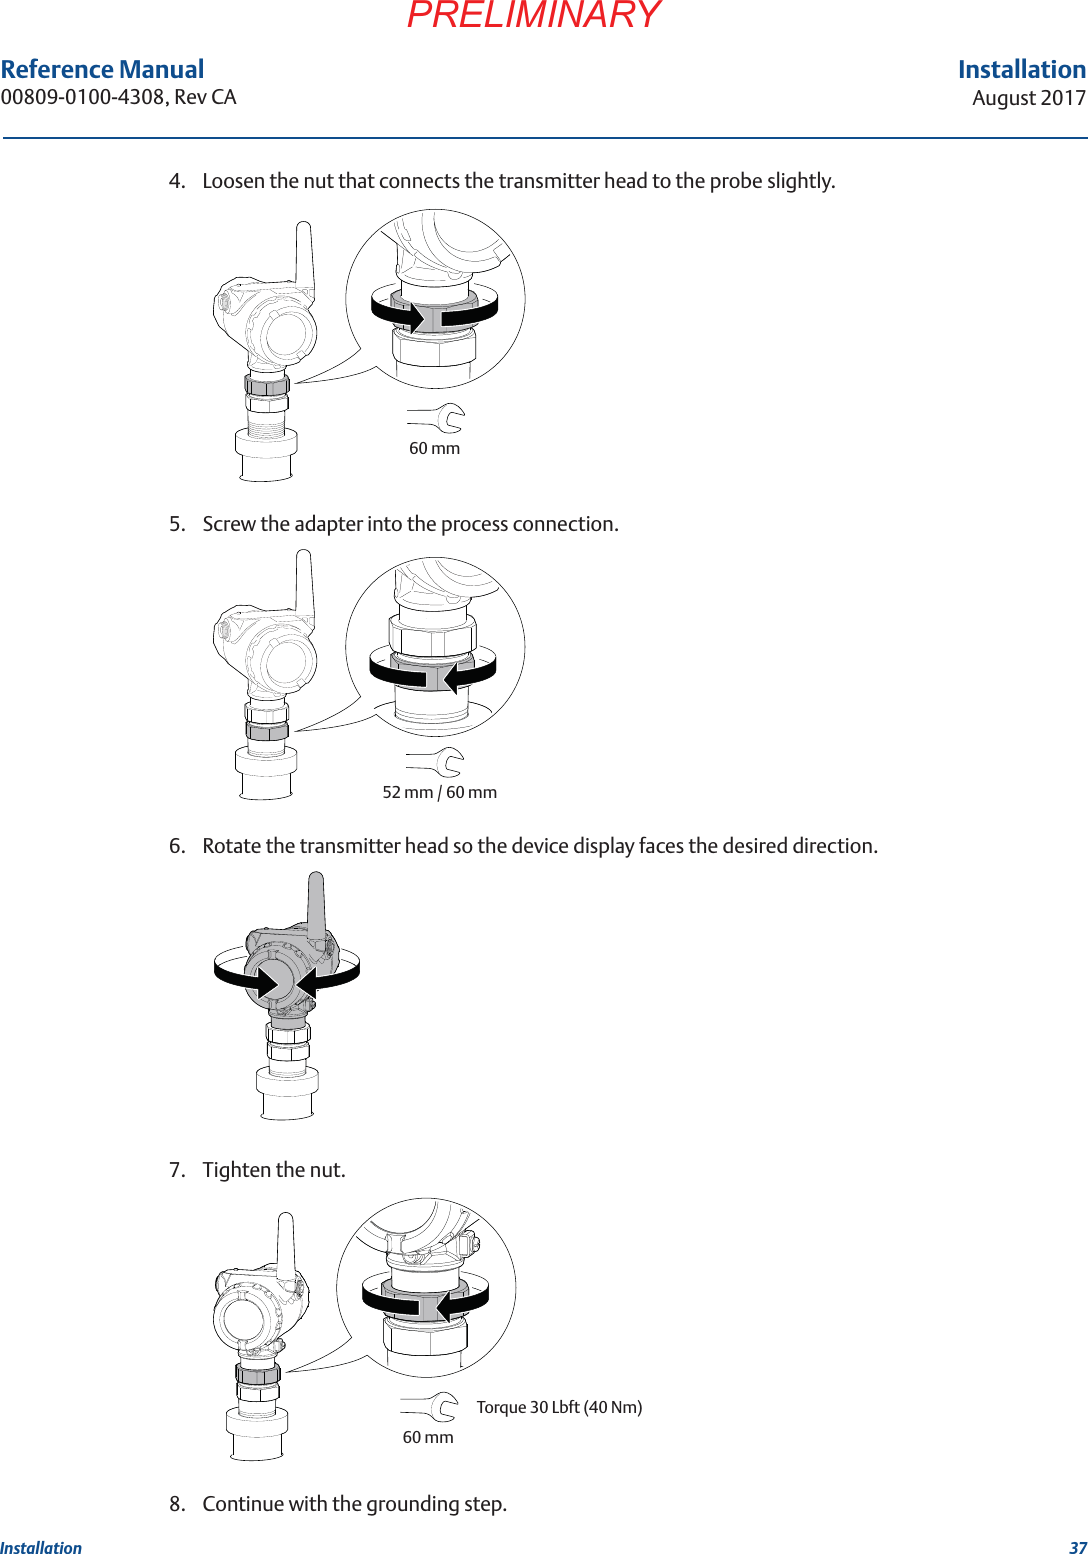 37InstallationAugust 2017InstallationPRELIMINARYReference Manual 00809-0100-4308, Rev CA4. Loosen the nut that connects the transmitter head to the probe slightly.5. Screw the adapter into the process connection.6. Rotate the transmitter head so the device display faces the desired direction.7. Tighten the nut.8. Continue with the grounding step.60 mm52 mm / 60 mm60 mmTorque 30 Lbft (40 Nm)